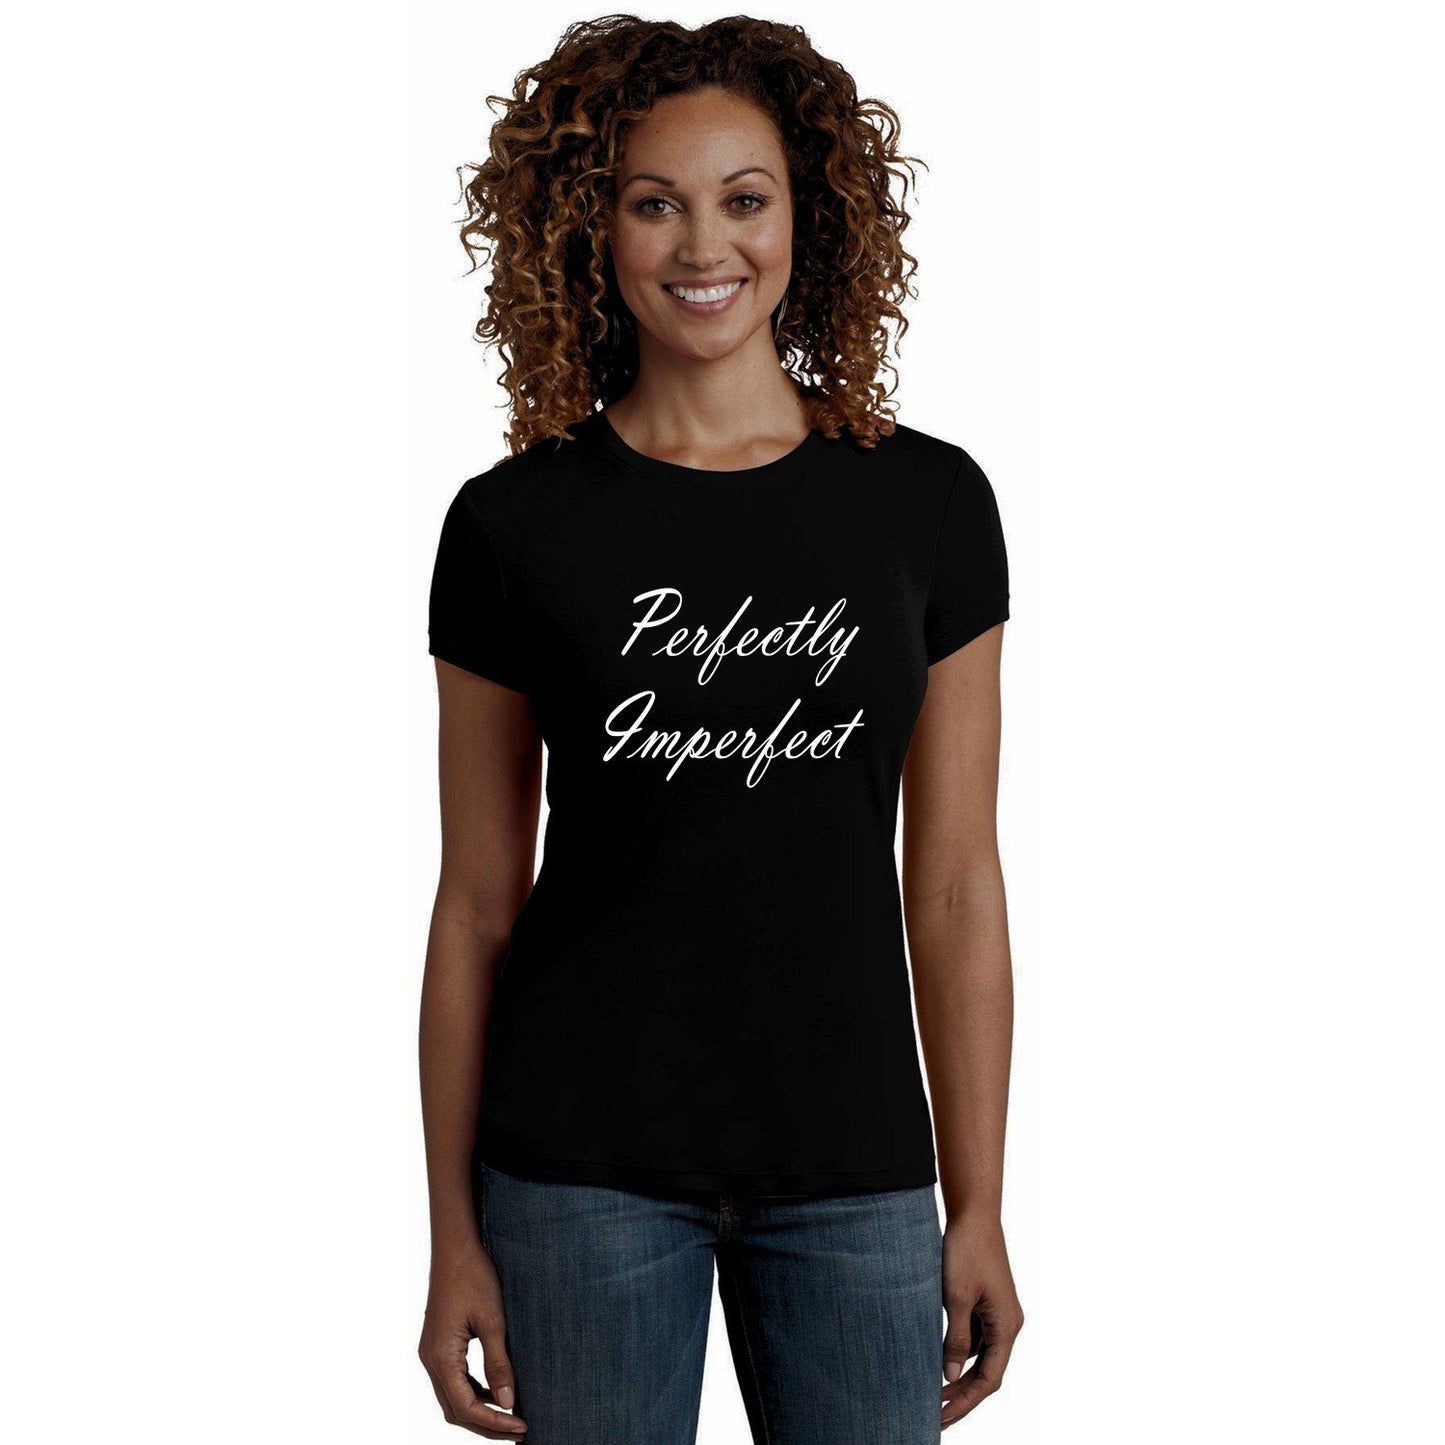 Perfectly Imperfect Self Expression T Shirt